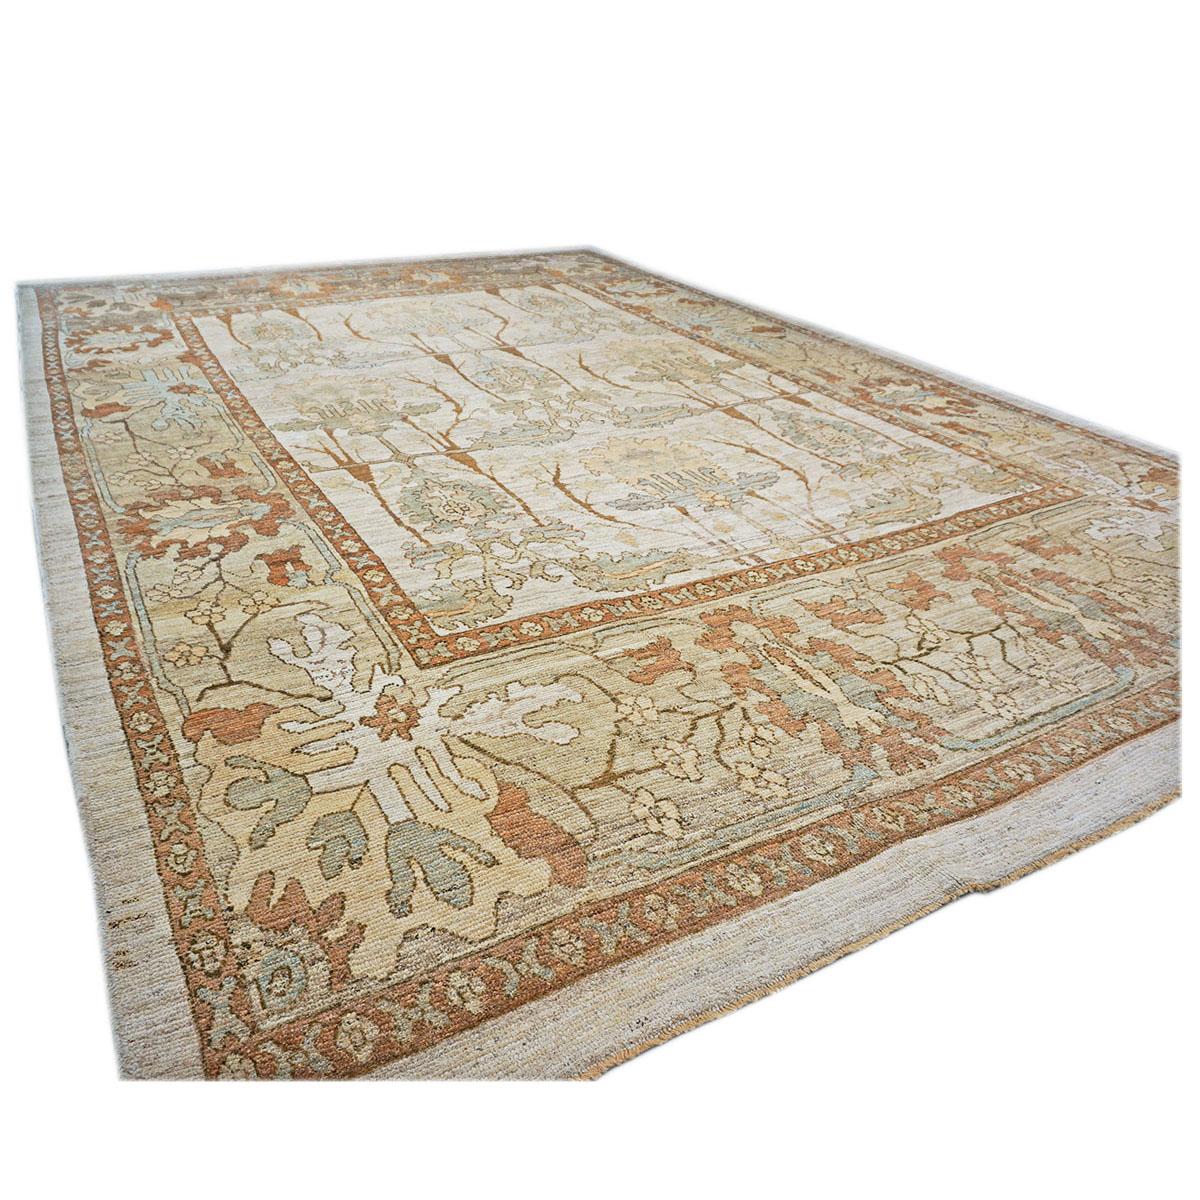 Hand-Woven 21st Century William Morris Donegal Carpet 13x18 Ivory, Tan, & Rust Handmade Rug For Sale